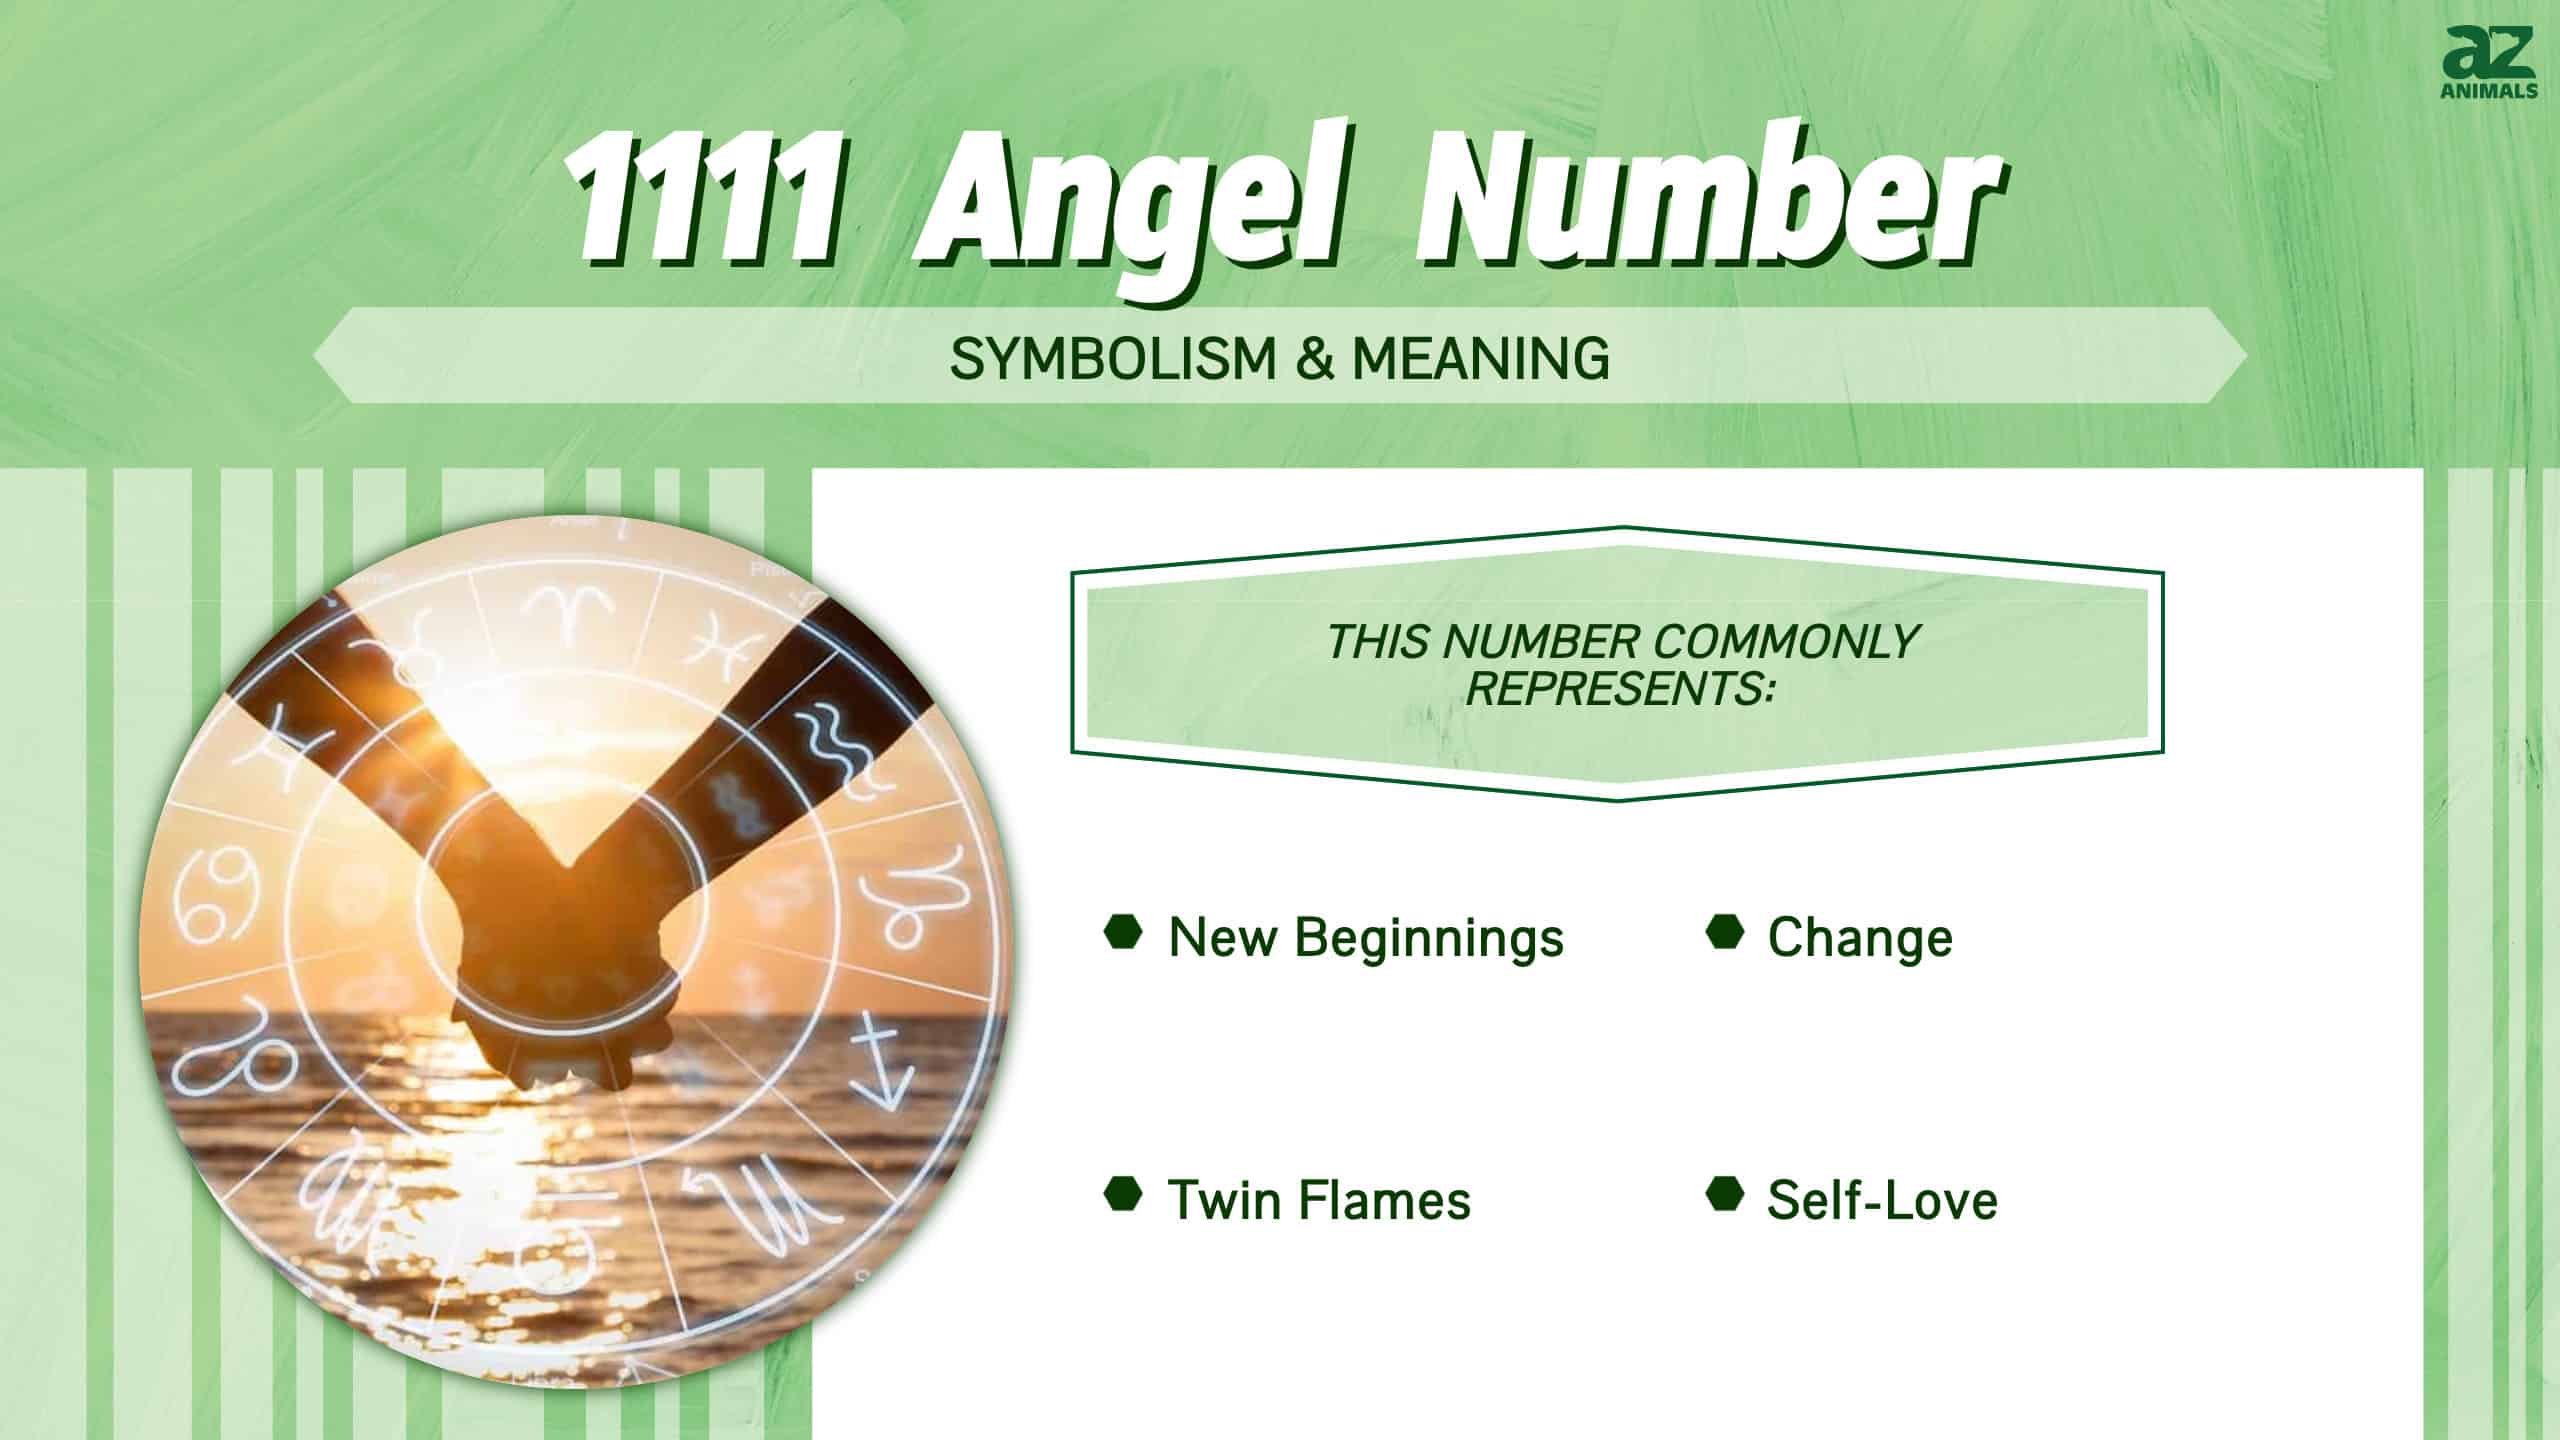 1111 Angel Number infographic